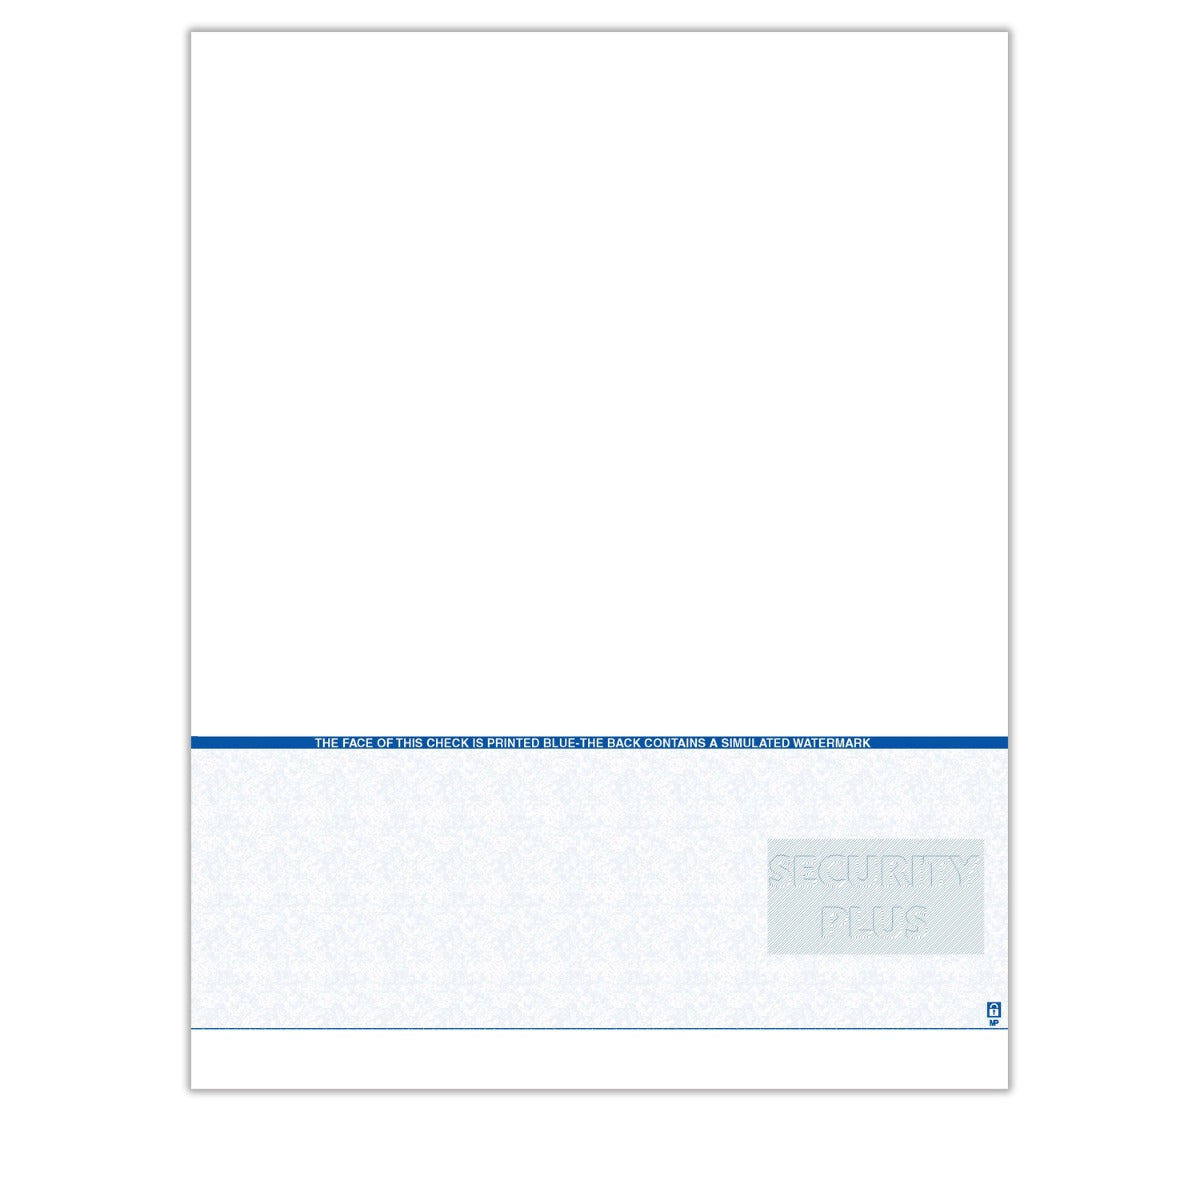 TROY Security Plus Check Paper, Blue, Check Bottom, Single Perforation, Ream